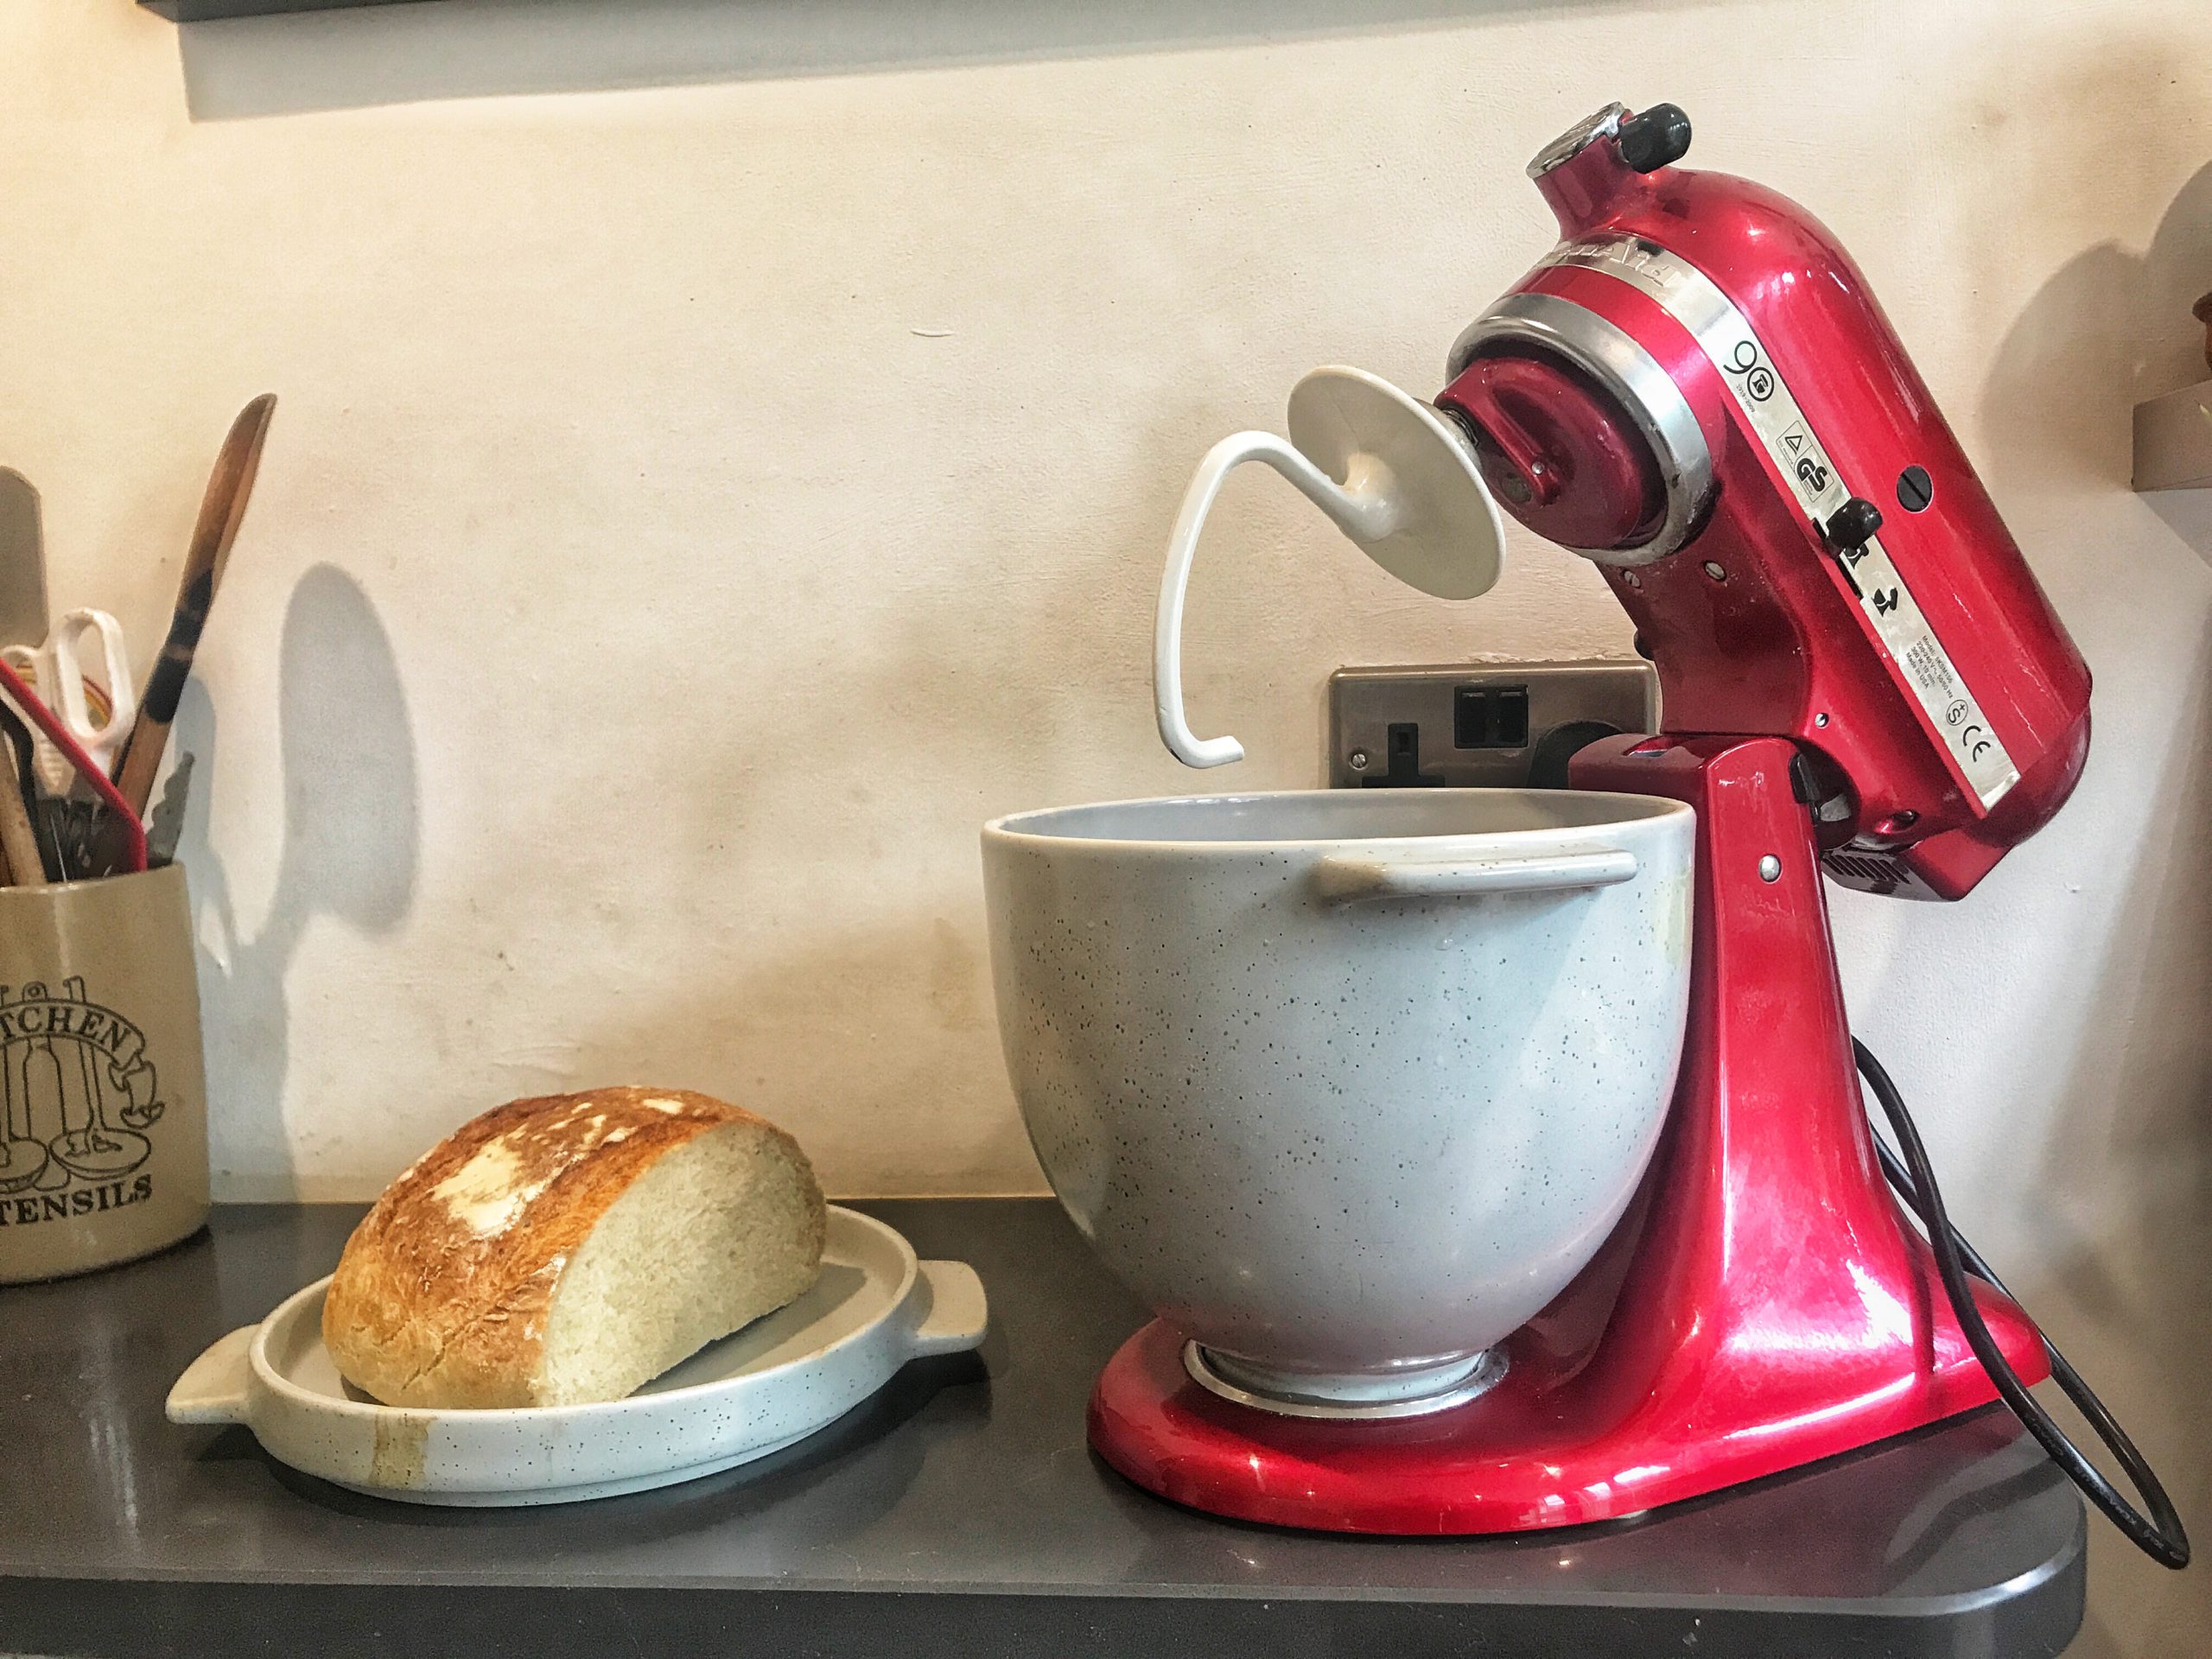 KitchenAid Launched an All-in-One Bread Bowl with a Baking Lid to